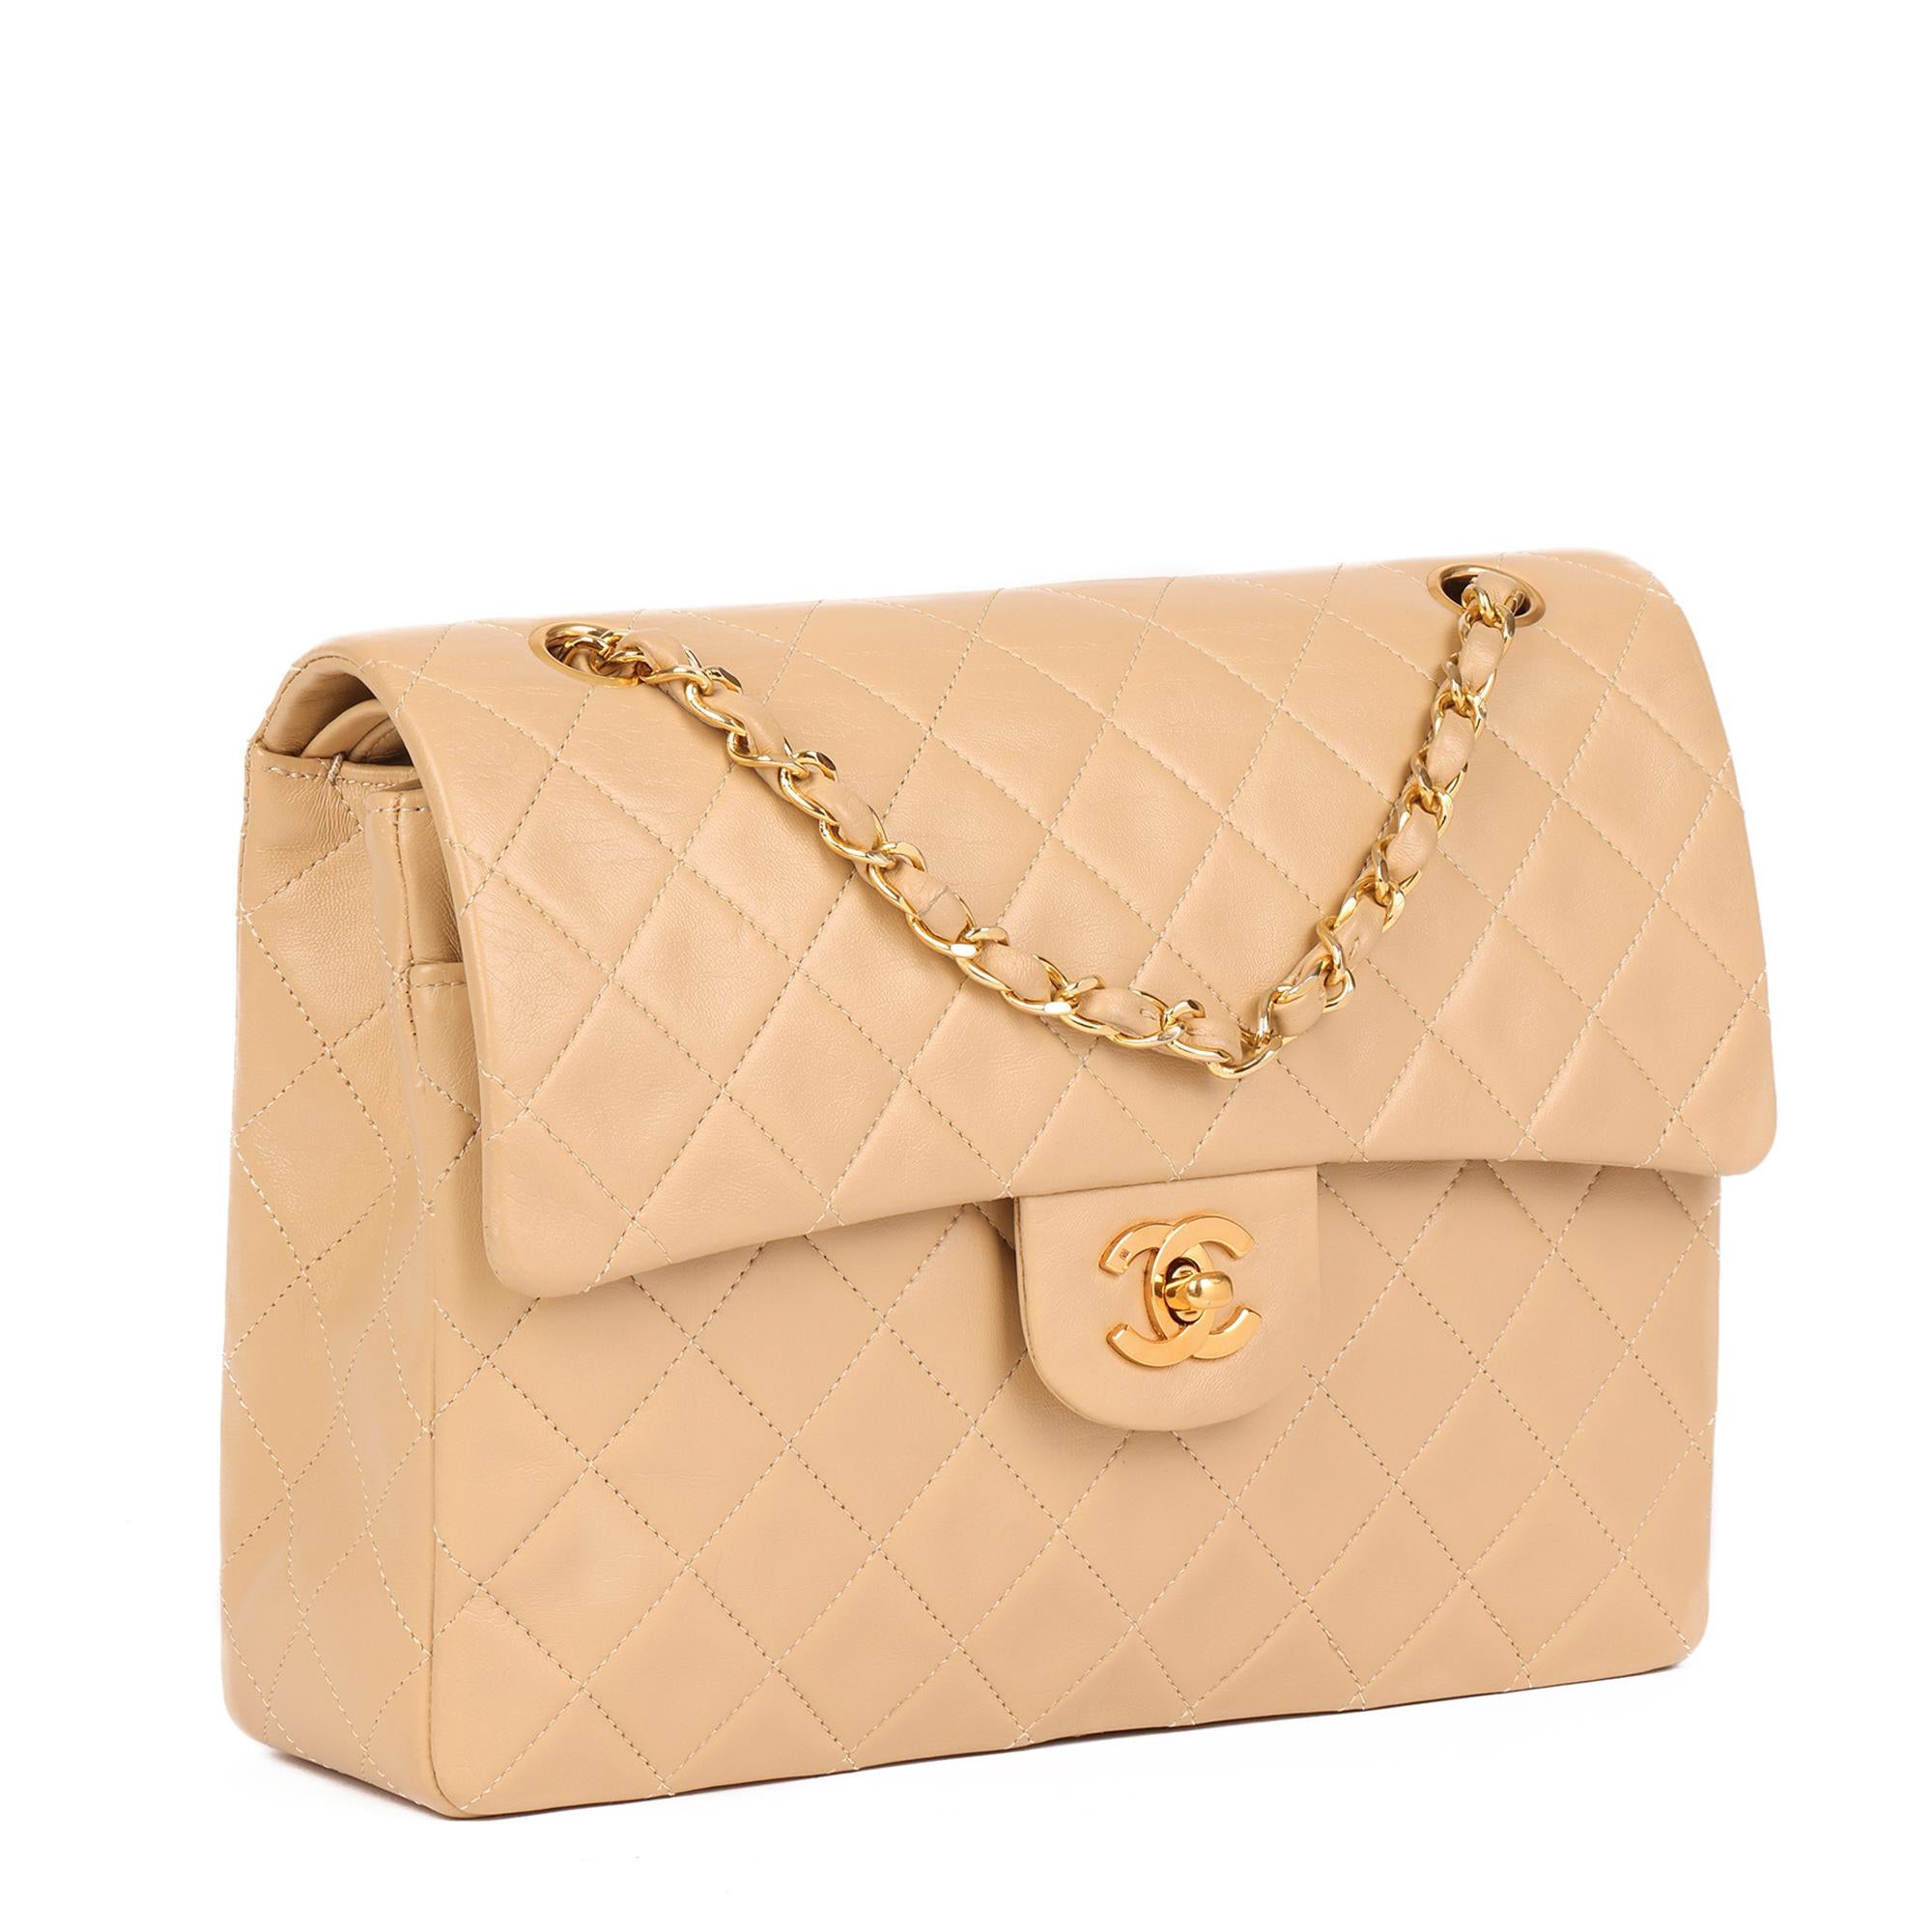 Women's Chanel Beige Quilted Lambskin Vintage Medium Tall Classic Single Flap Bag